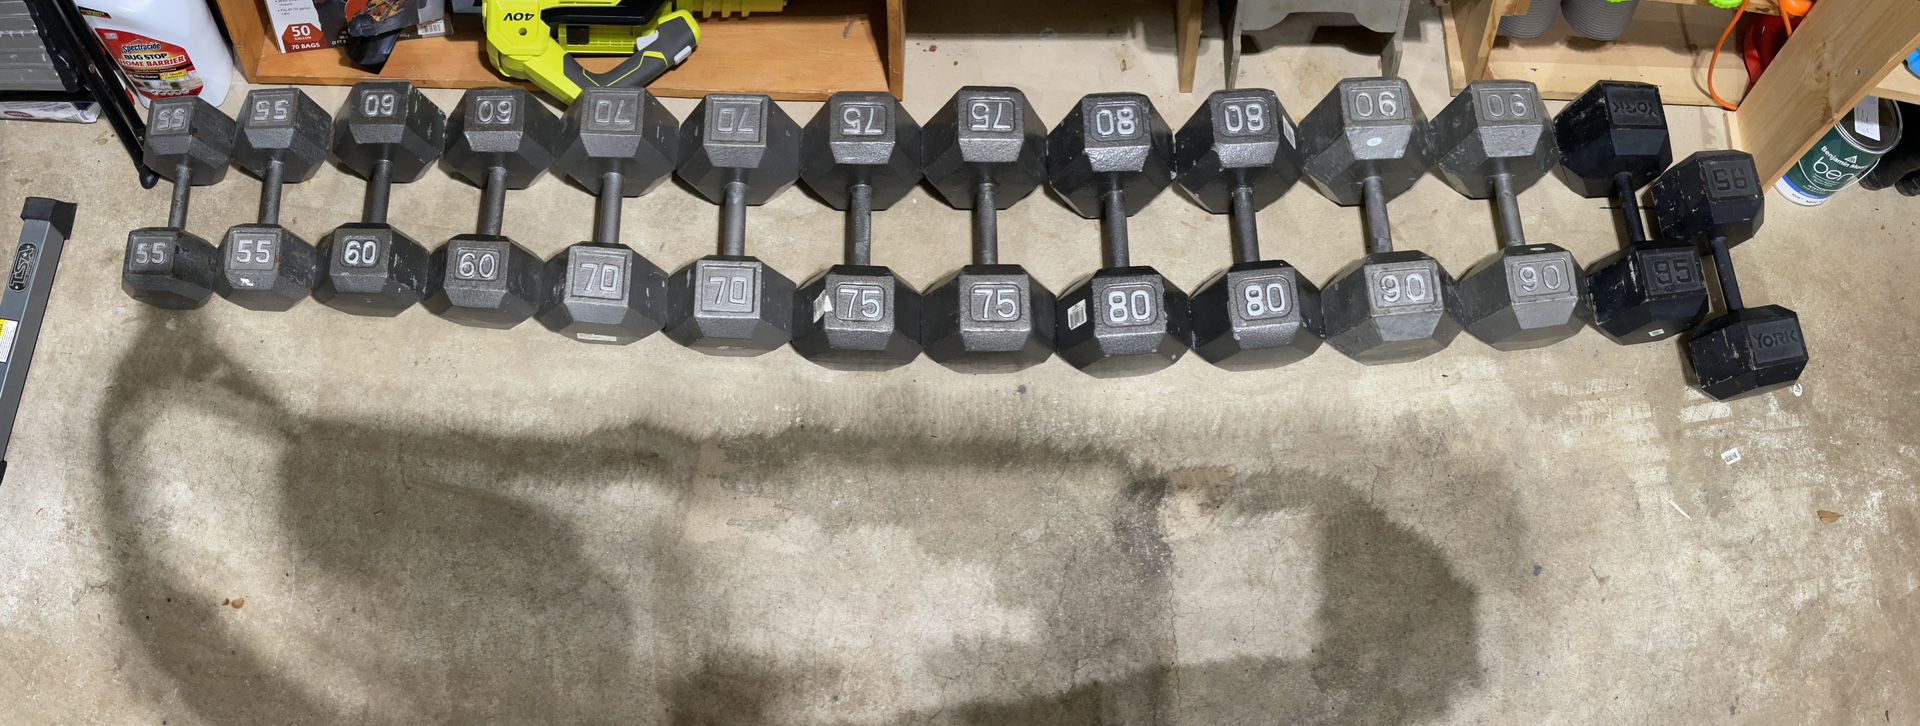 Pair of Dumbbells - PRICE IS FIRM!!!